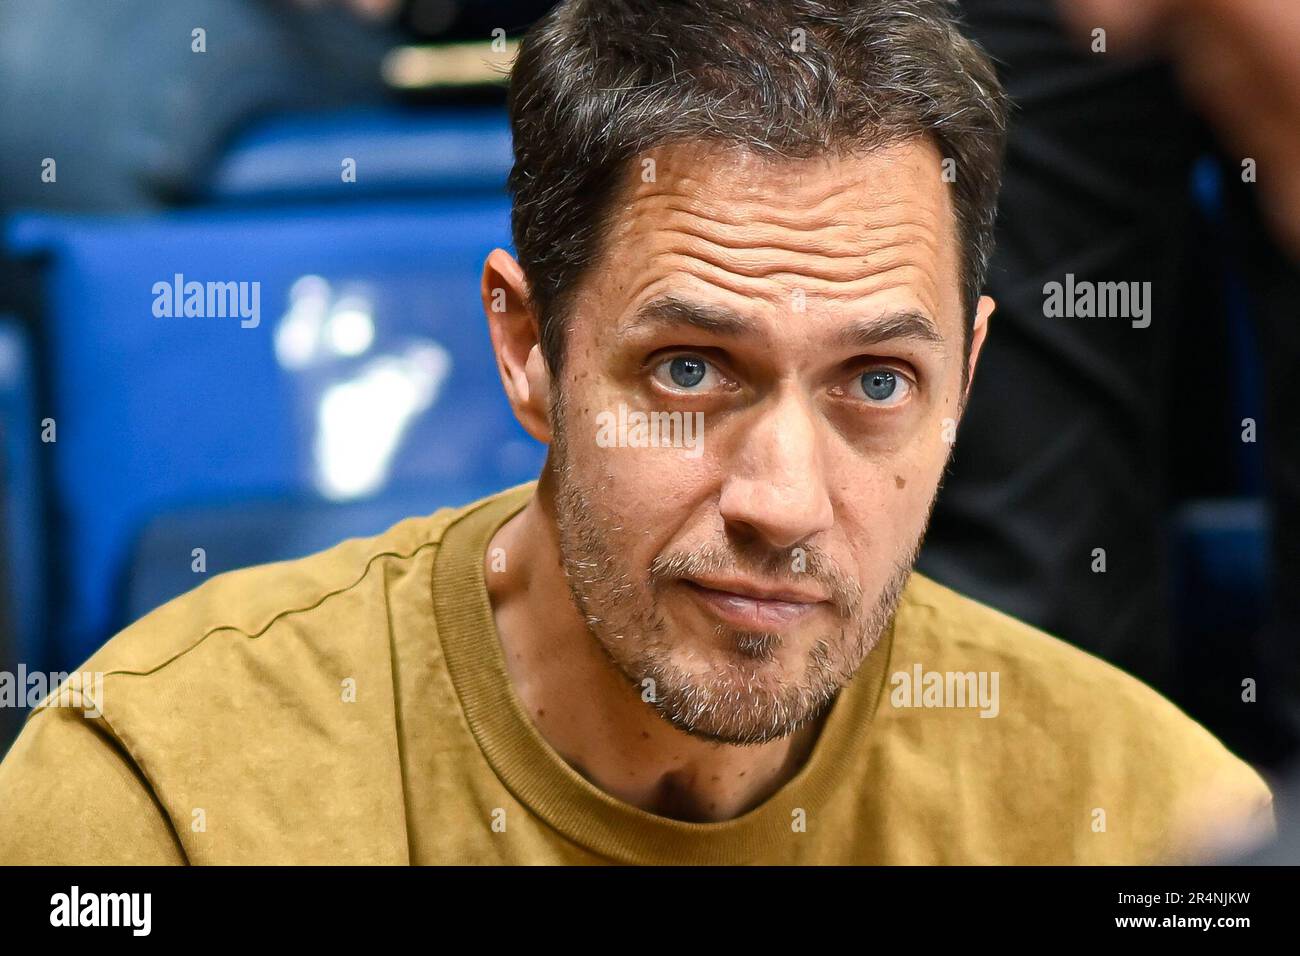 https://c8.alamy.com/comp/2R4NJKW/paris-france-28th-may-2023-fabien-marsaud-grand-corps-malade-during-the-french-championship-betclic-elite-basketball-match-between-asvel-basket-and-metropolitans-92-mets-or-boulogne-levallois-on-may-28-2023-in-levallois-france-credit-victor-jolyalamy-live-news-2R4NJKW.jpg